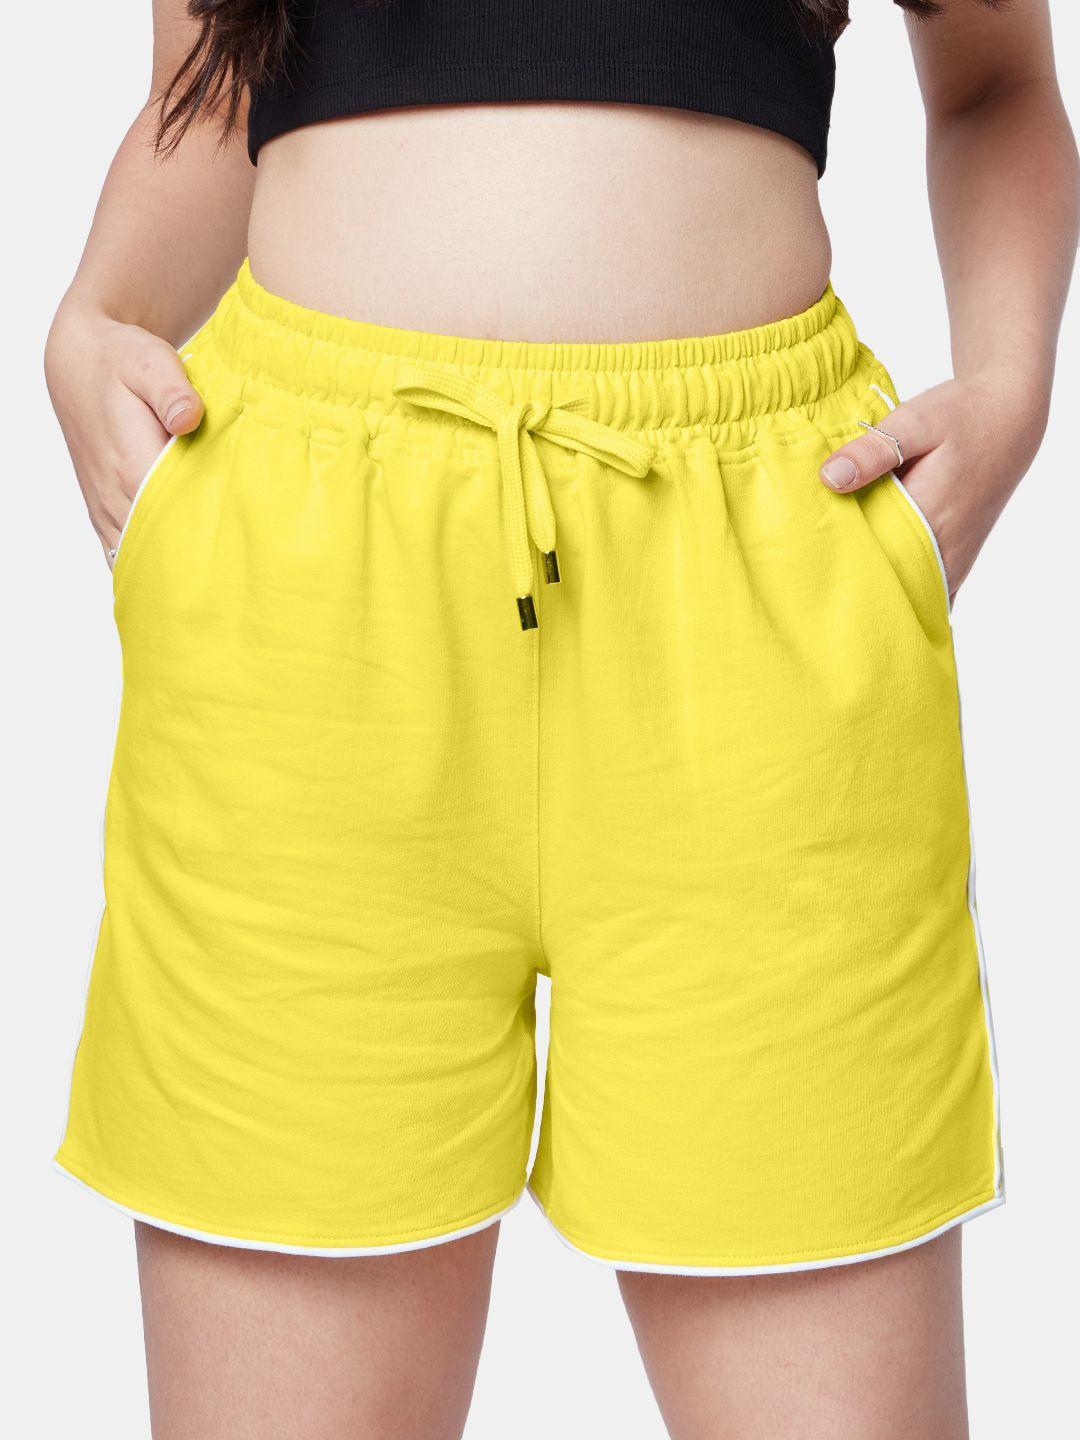 the souled store women yellow mid-rise sports shorts